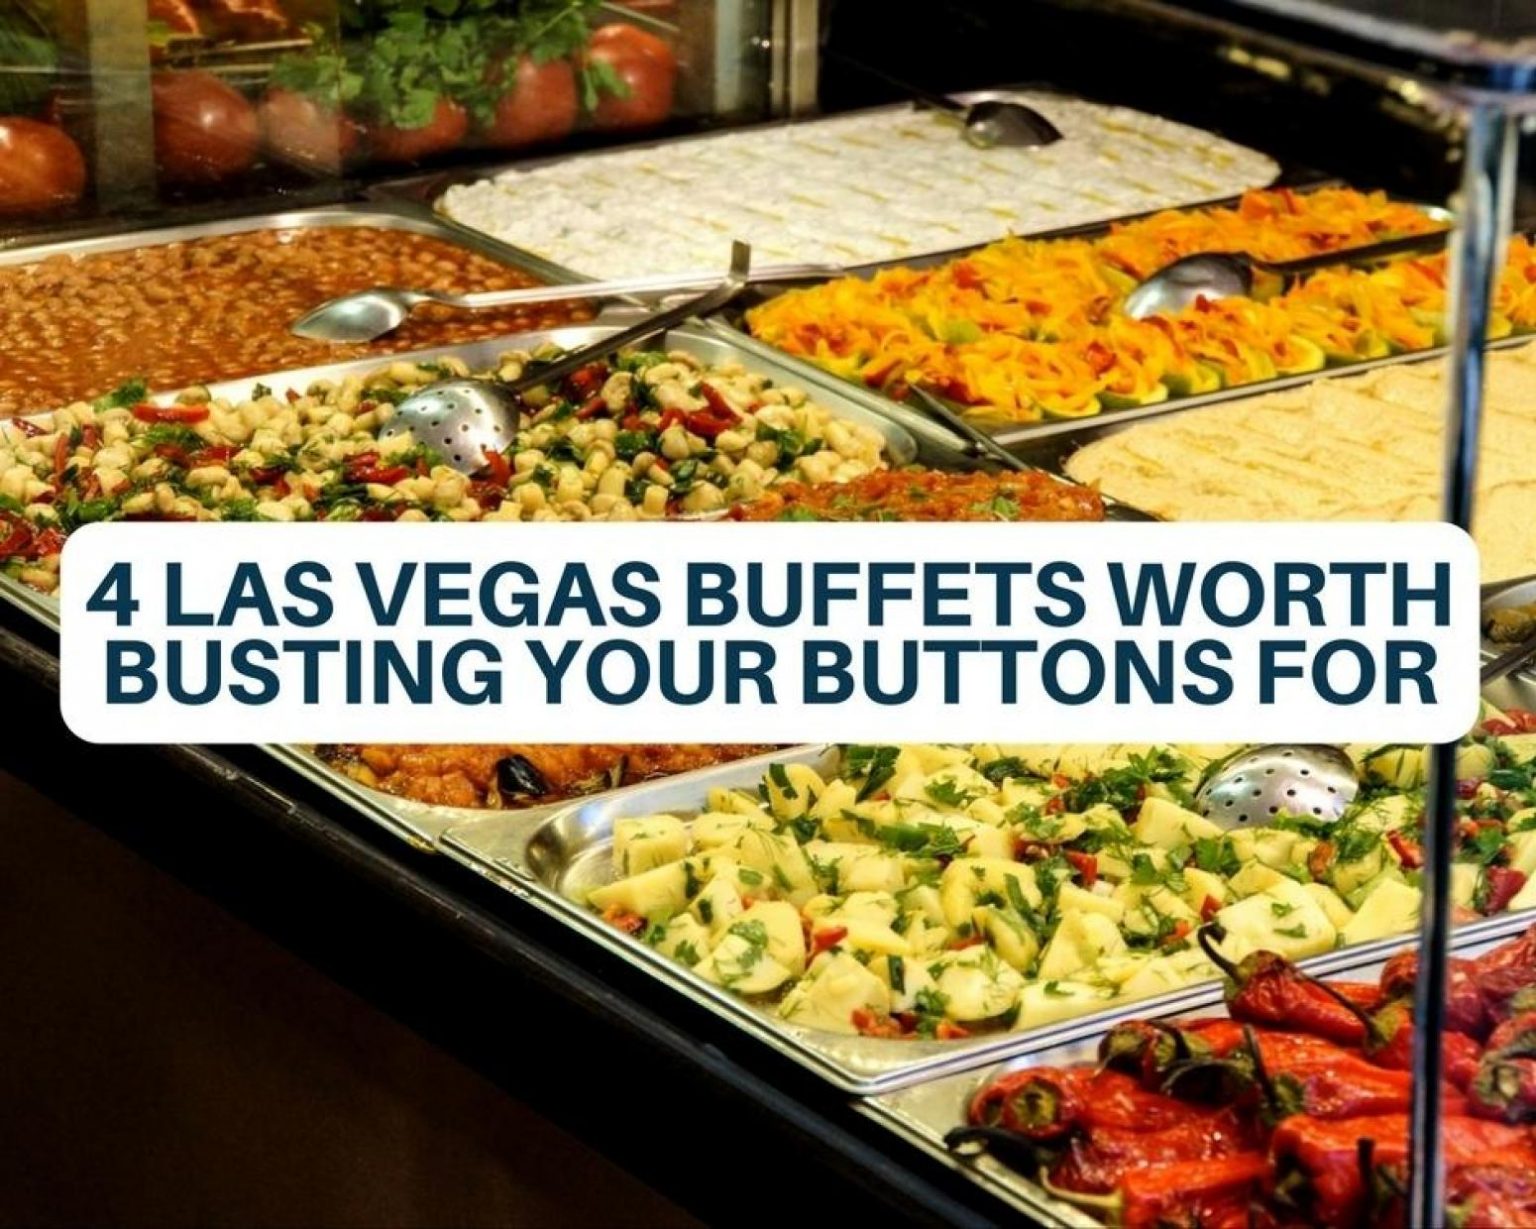 4 Las Vegas Buffet's Worth Busting Your Buttons For Just A Pinch